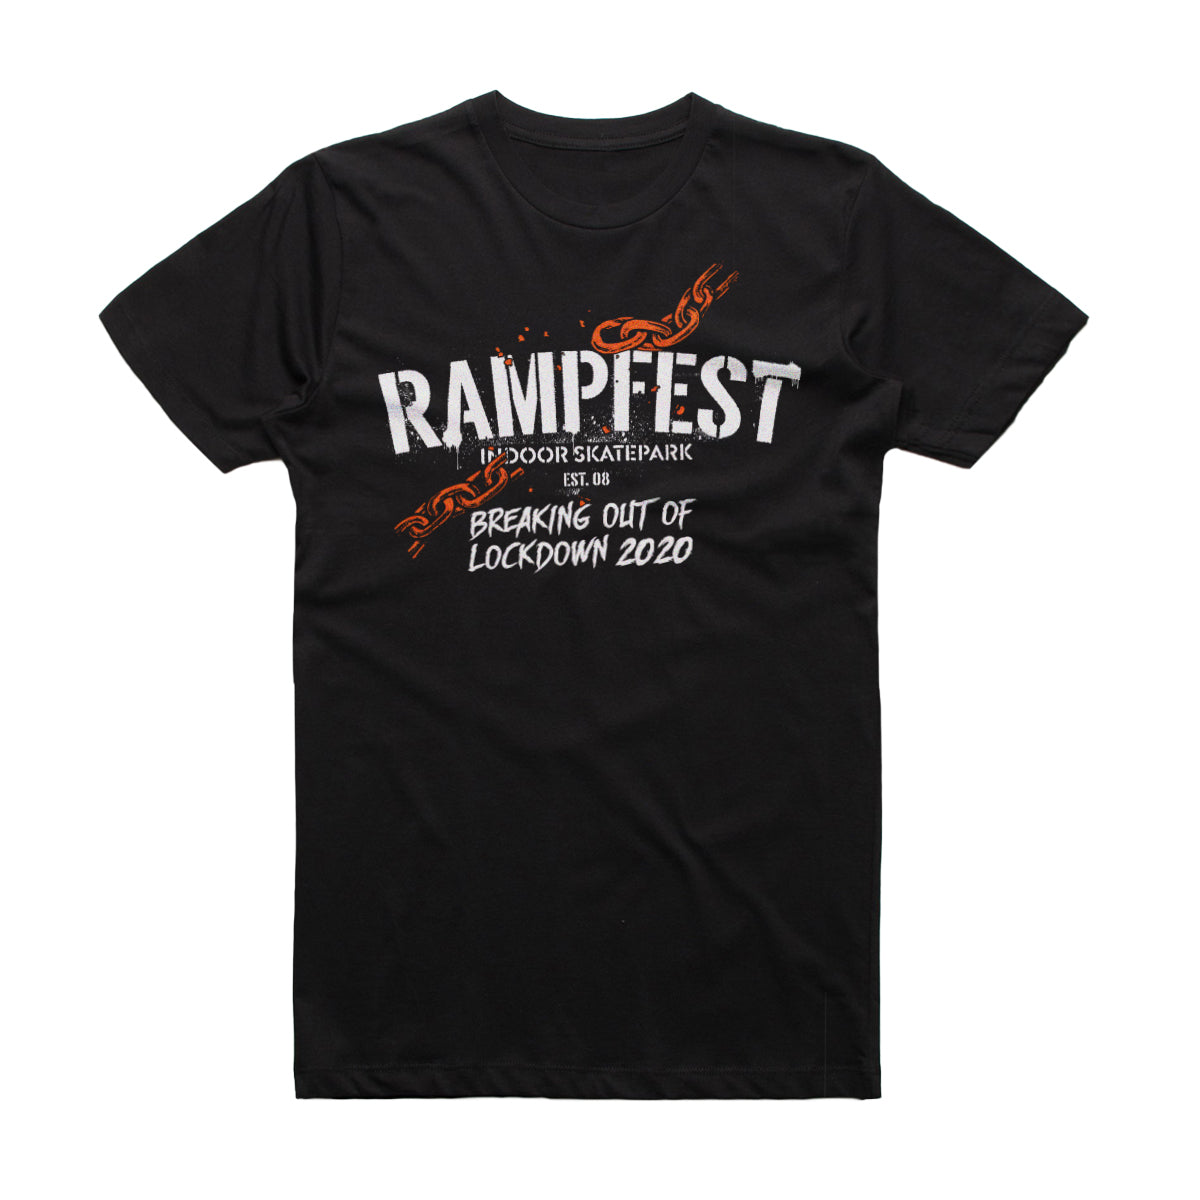 RampFest "Breaking out of Lockdown" Tee Shirt